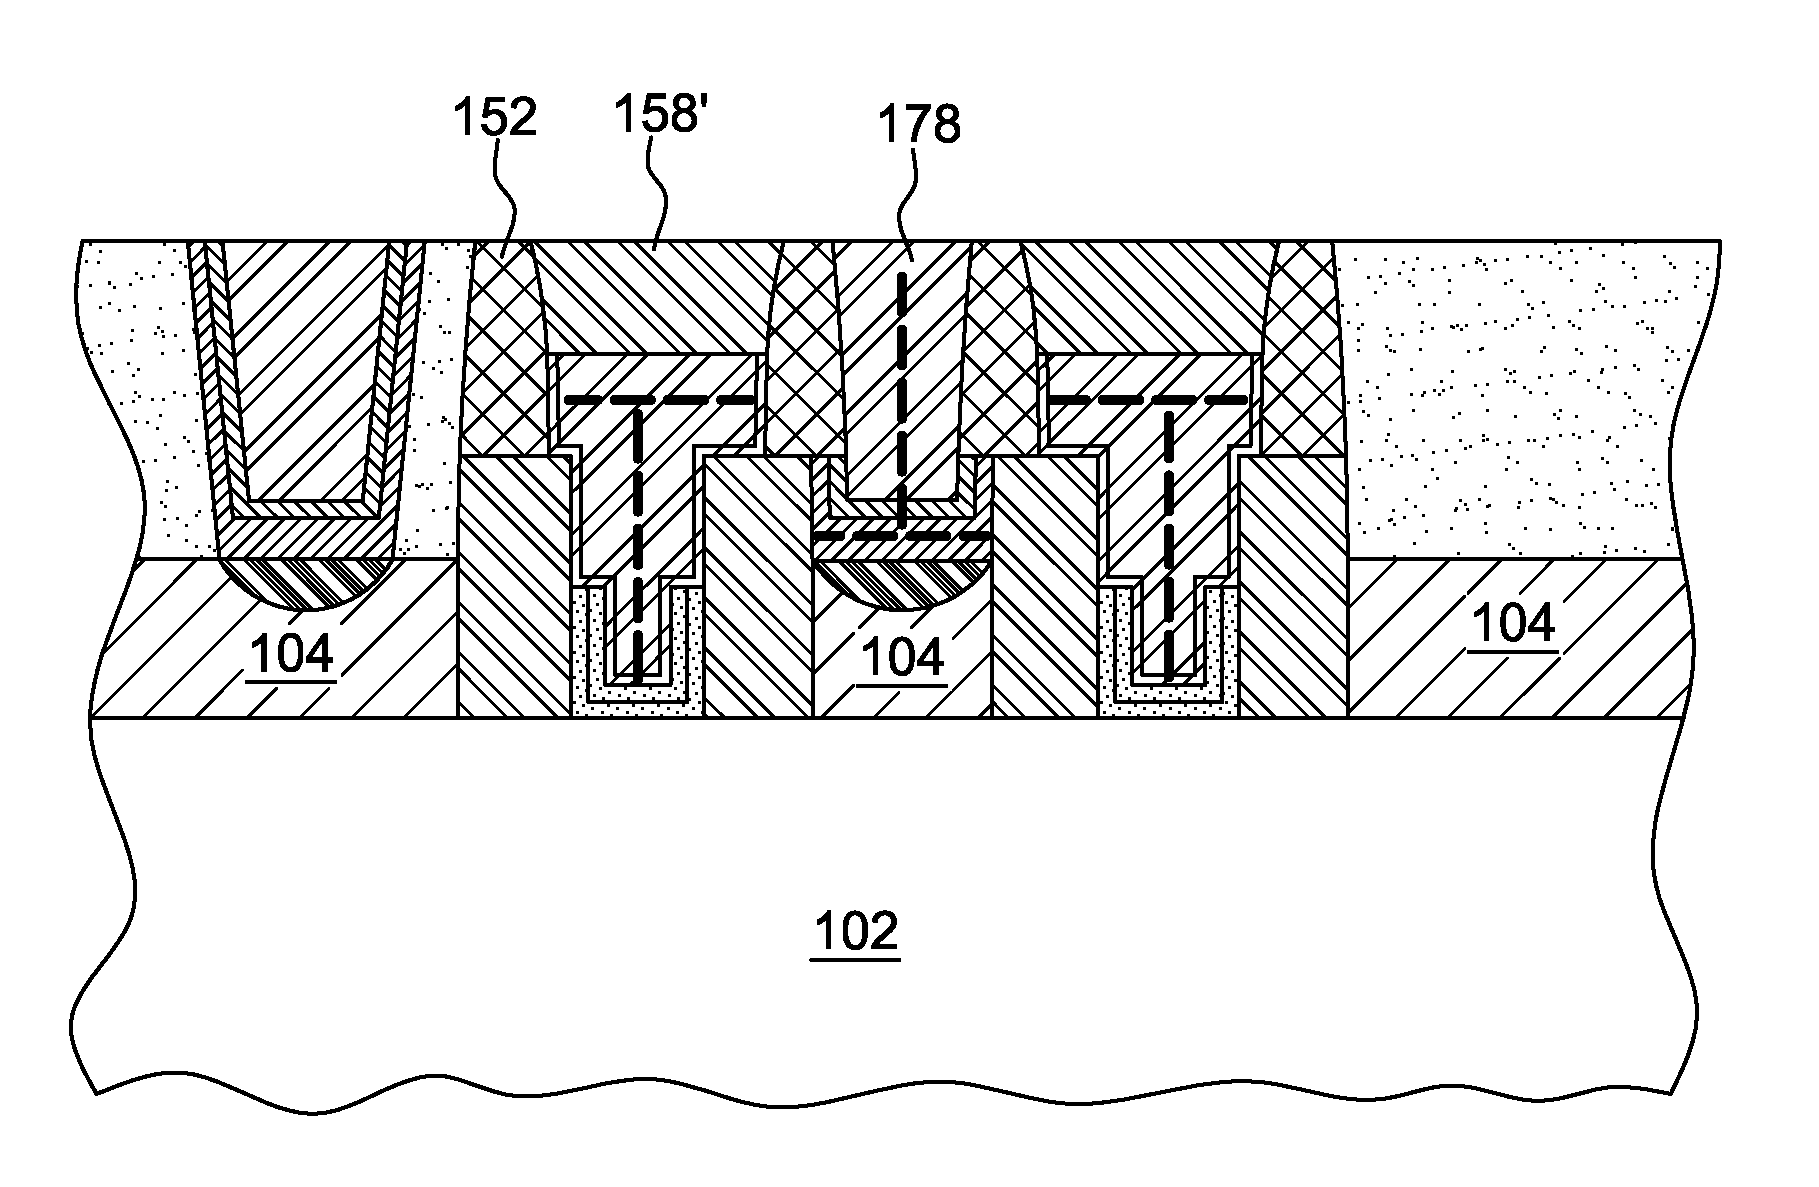 Semiconductor devices and methods of fabrication with reduced gate and contact resistances